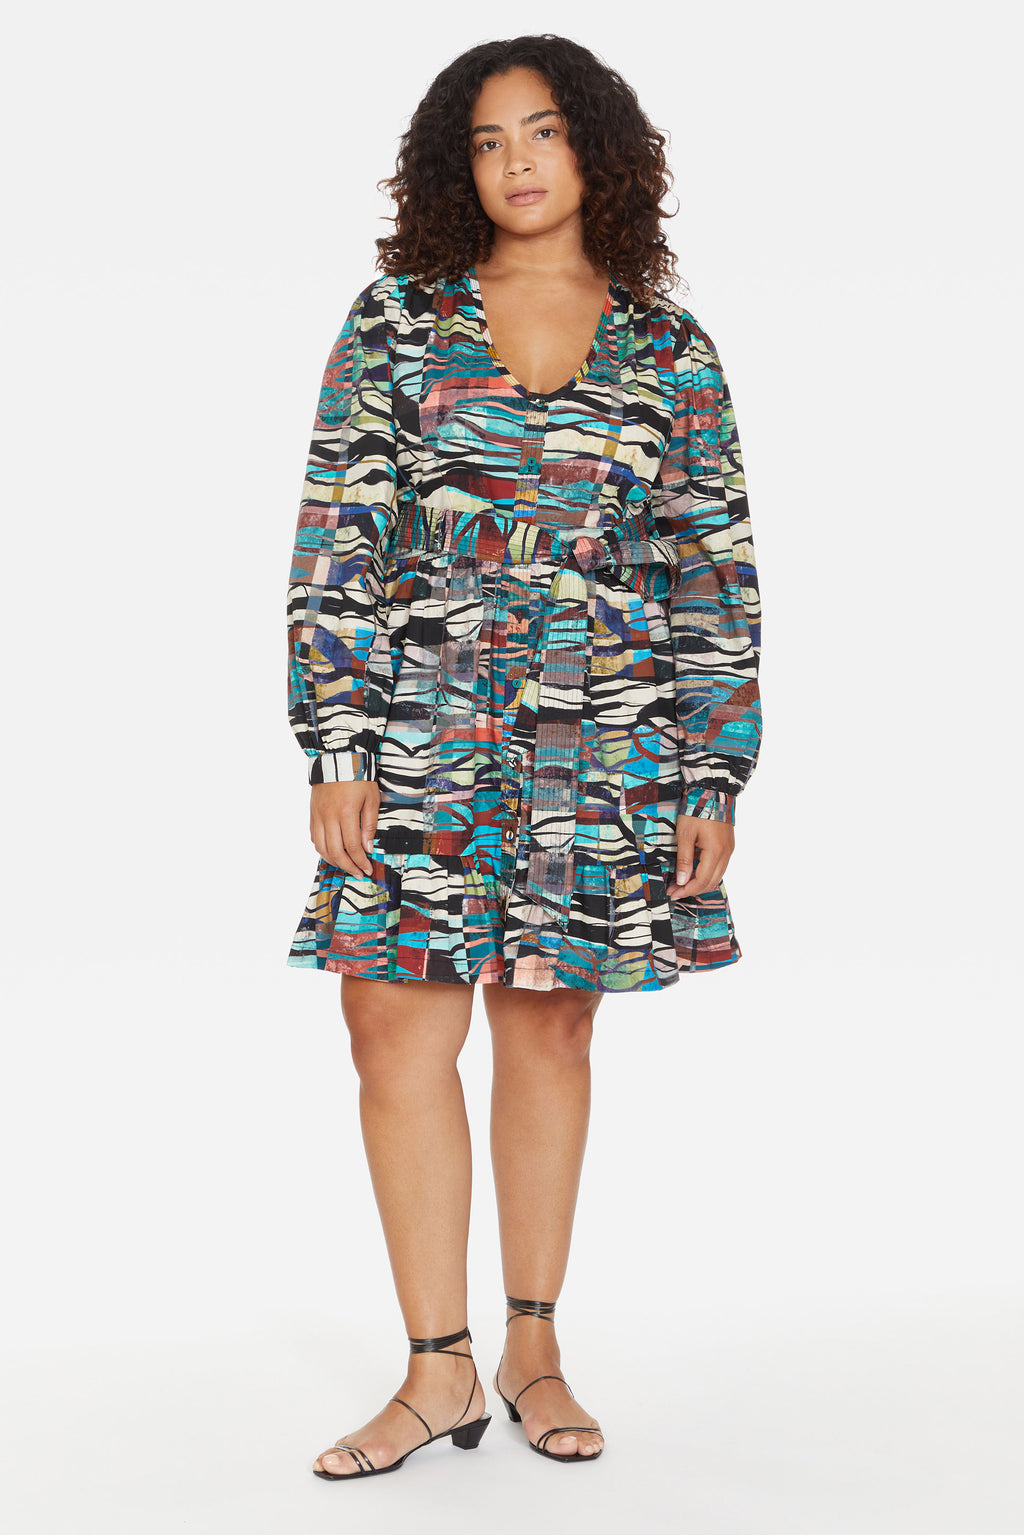 Multi-colored wavy print button-down dress with tie belt